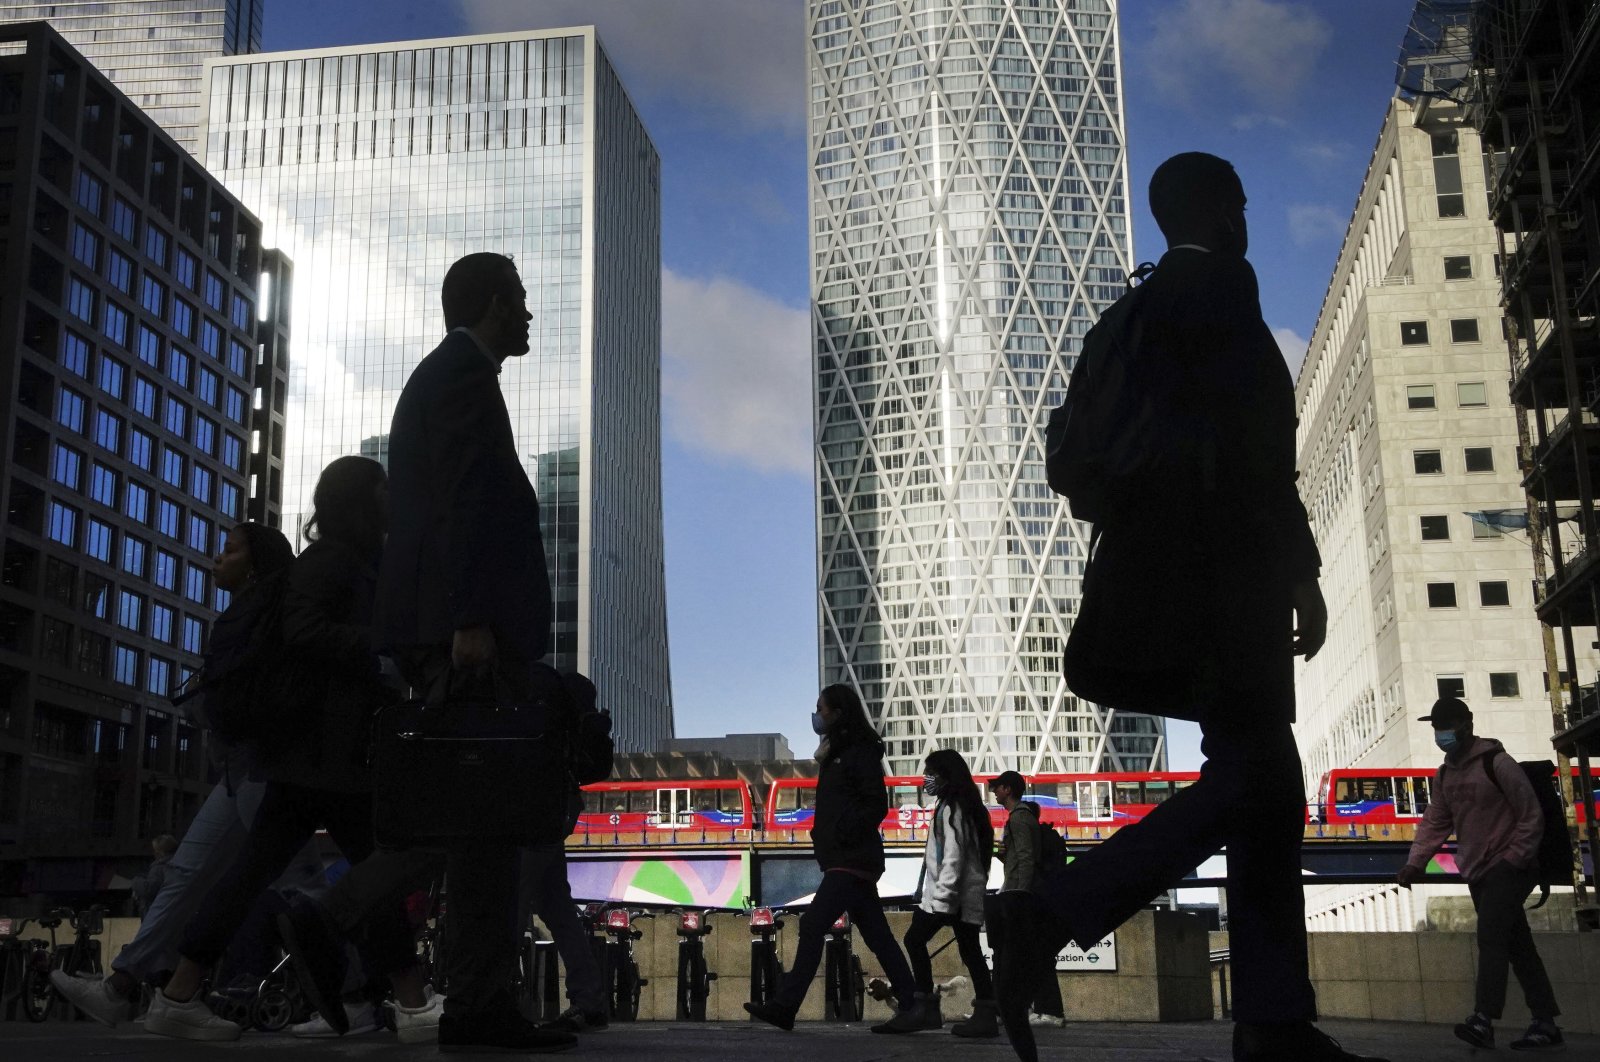 Office workers and commuters walk through Canary Wharf, during the morning rush hour, in London, U.K., Oct. 6, 2021. (AP Photo)